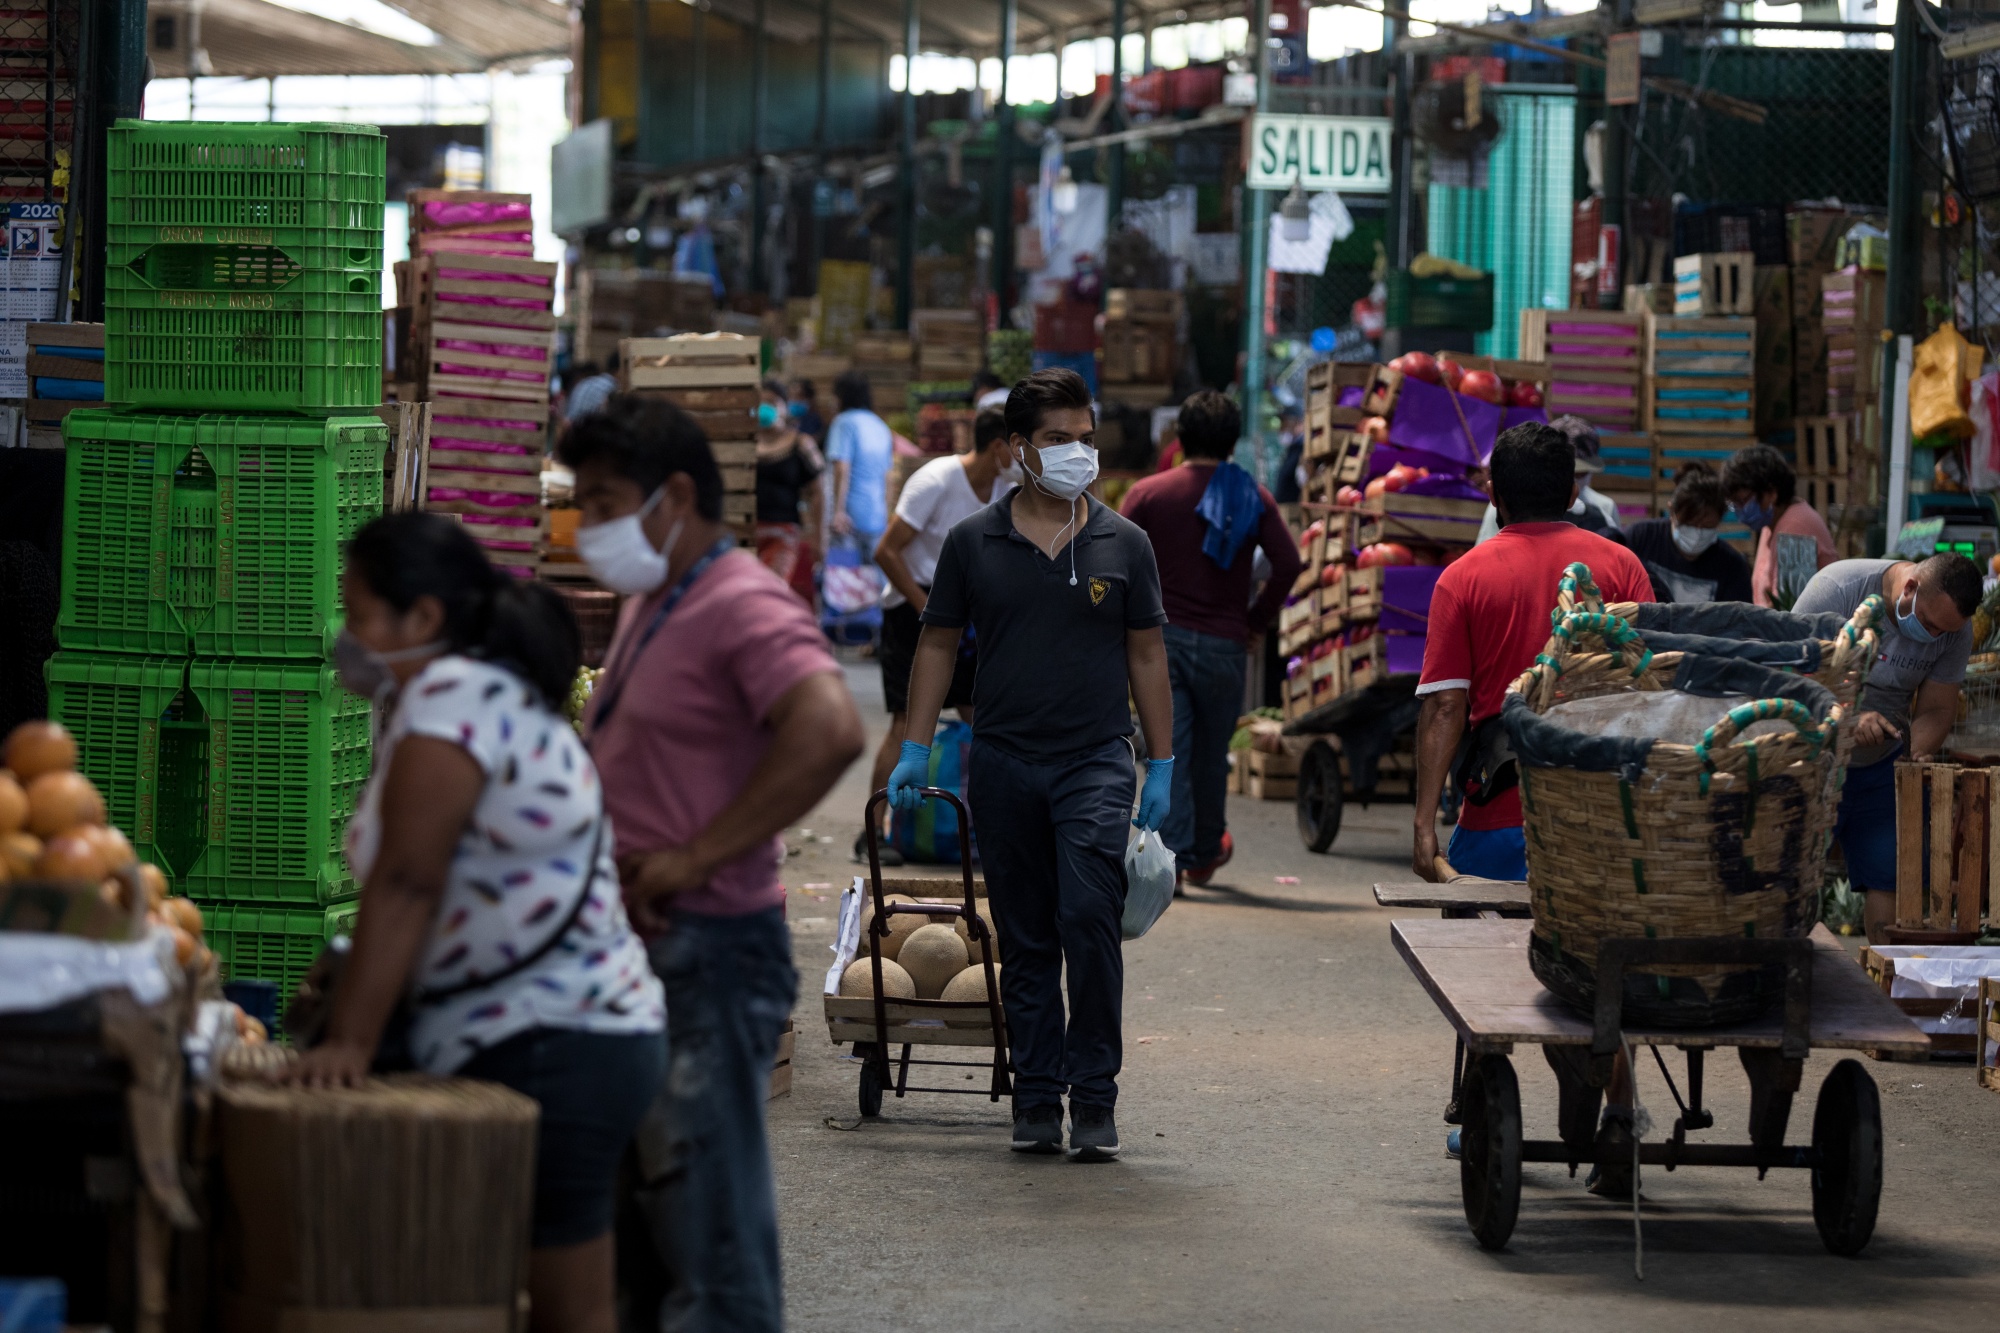 People wearing protective masks shop at a market in Lima, Peru.